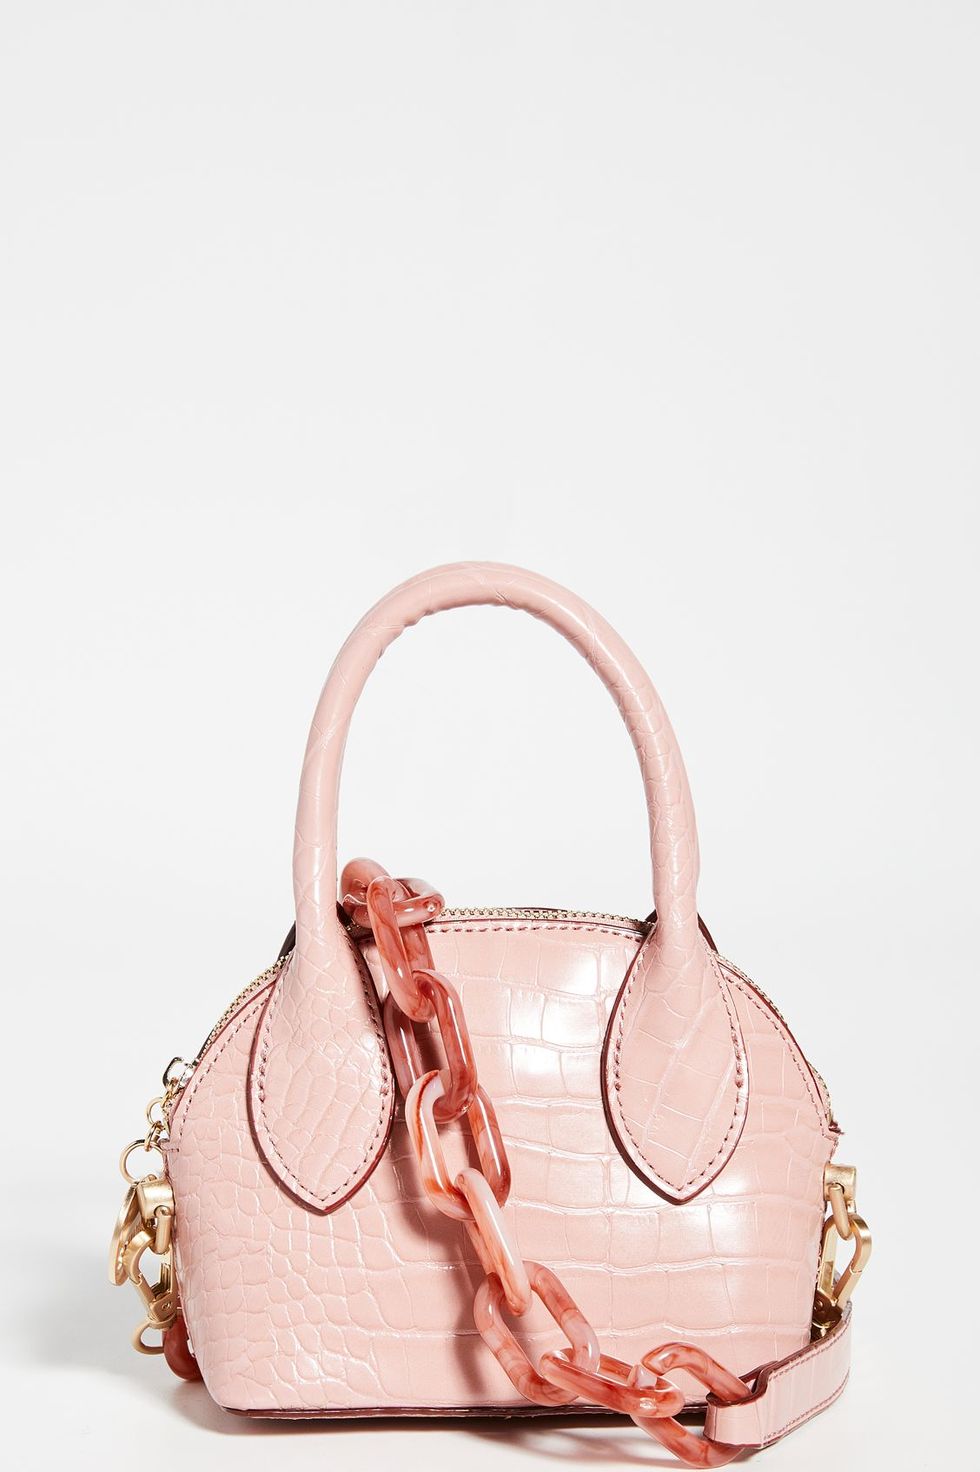 The 25 Best Spring Handbags for 2020 That Are So Pretty